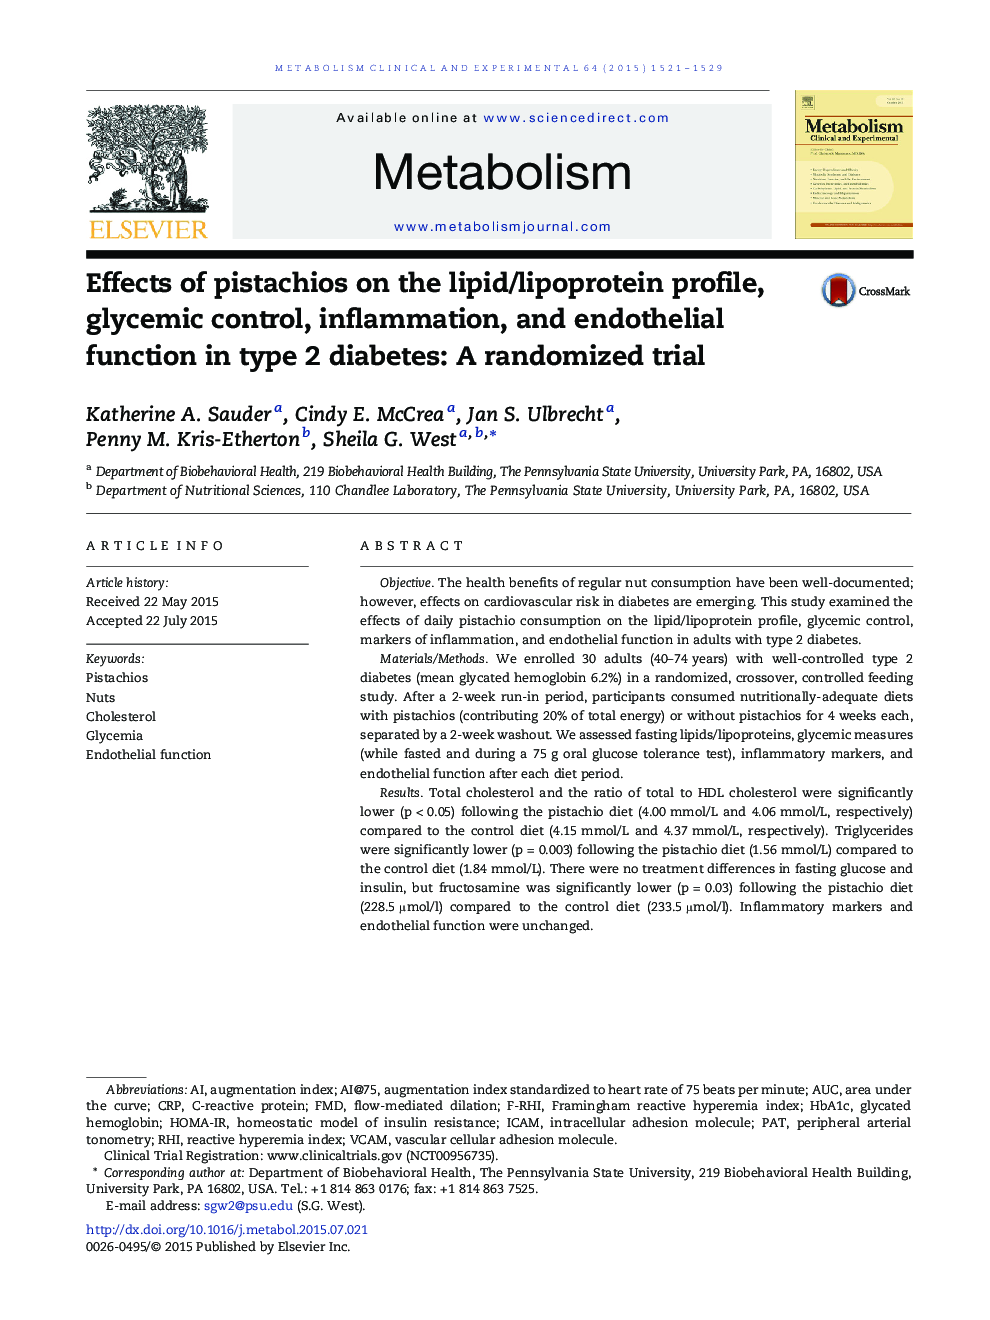 Effects of pistachios on the lipid/lipoprotein profile, glycemic control, inflammation, and endothelial function in type 2 diabetes: A randomized trial 